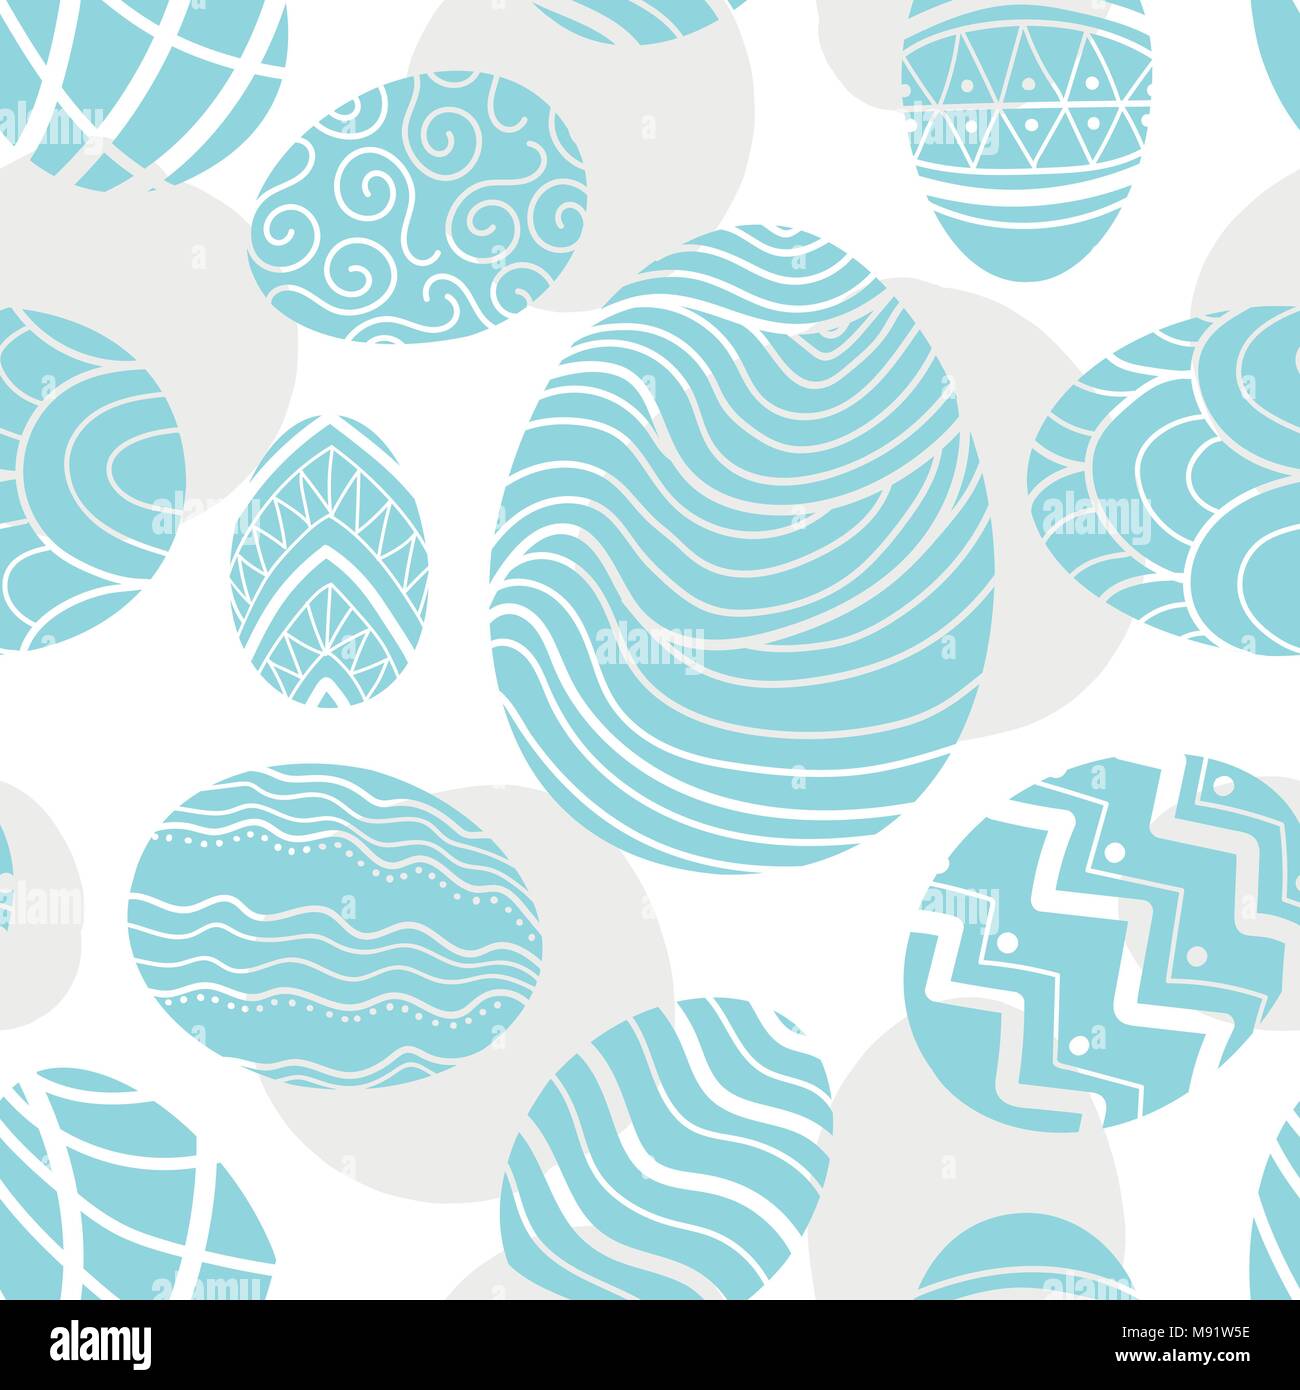 Easter eggs in pastel blue silhouette and light gray plane random on white background. Cute hand drawn seamless pattern design for Easter festival in  Stock Vector